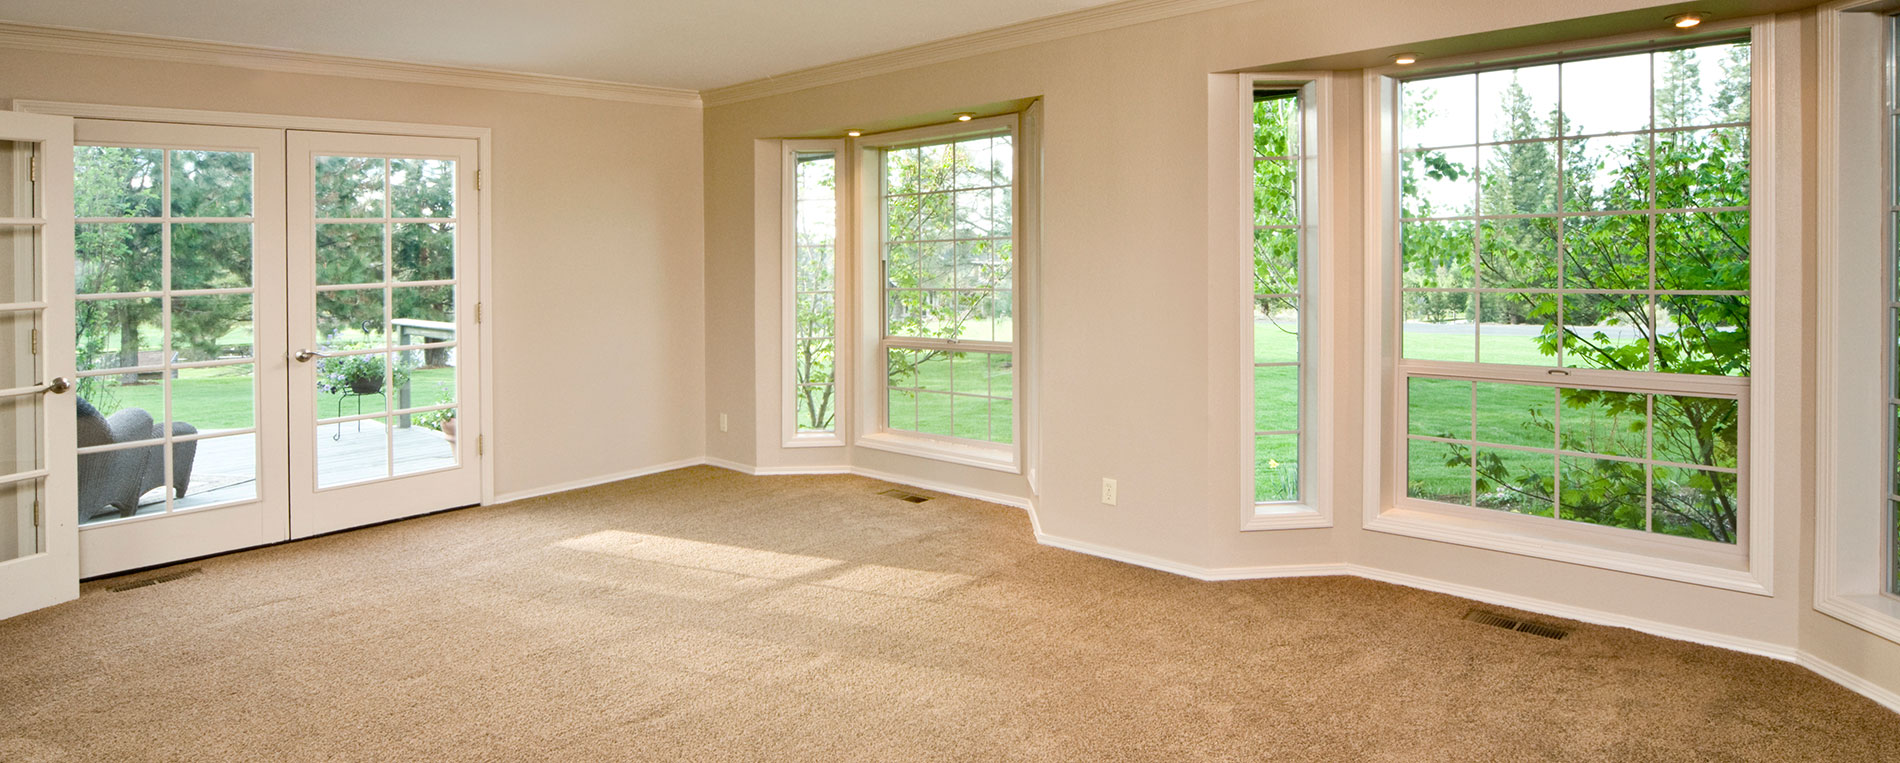 Carpet Cleaning Encino, CA | 818-661-1683 | Rugs & Upholstery